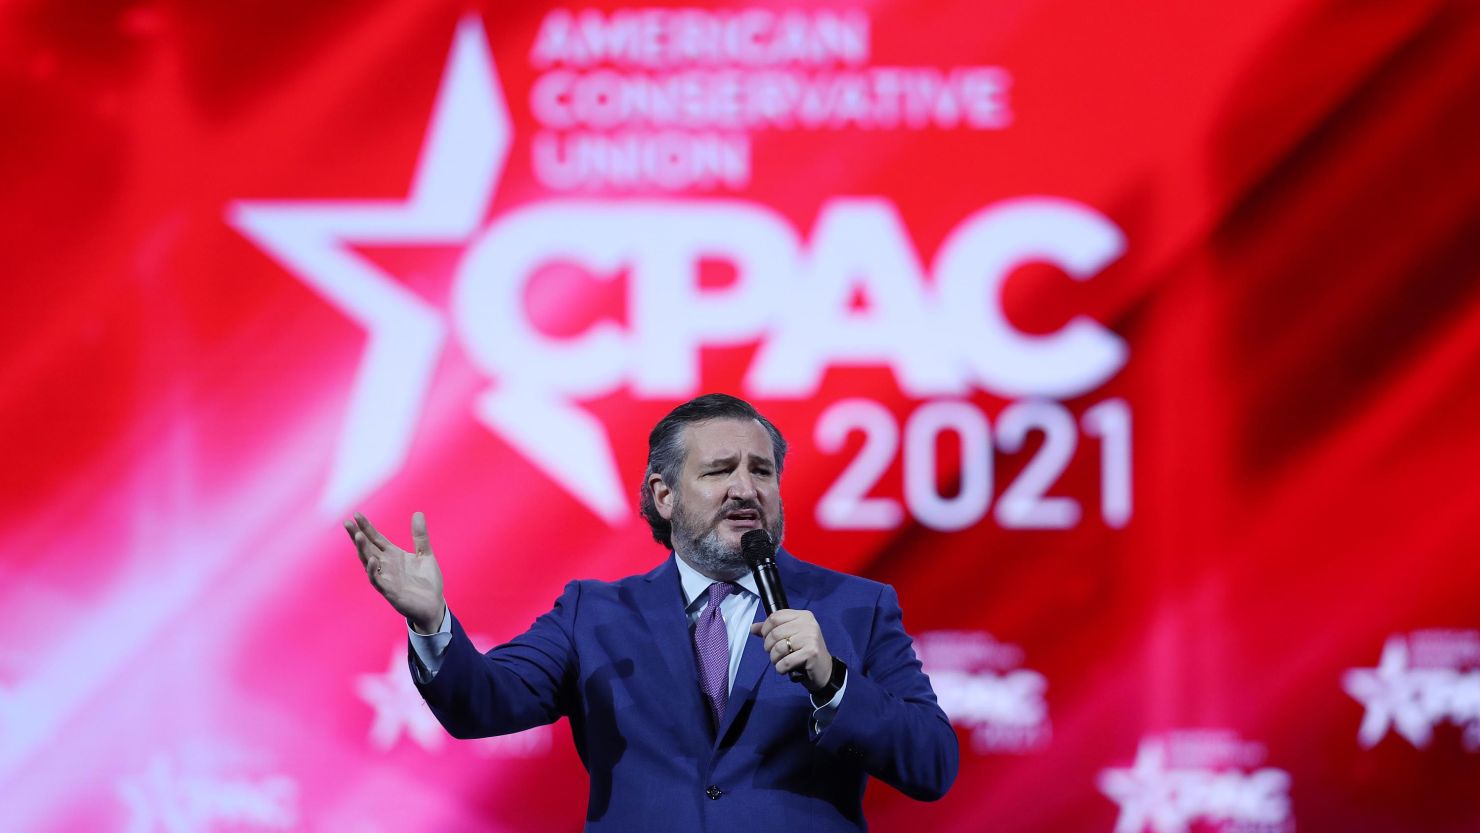 Sen. Ted Cruz addresses the Conservative Political Action Conference held in the Hyatt Regency on February 26, 2021, in Orlando, Florida. 